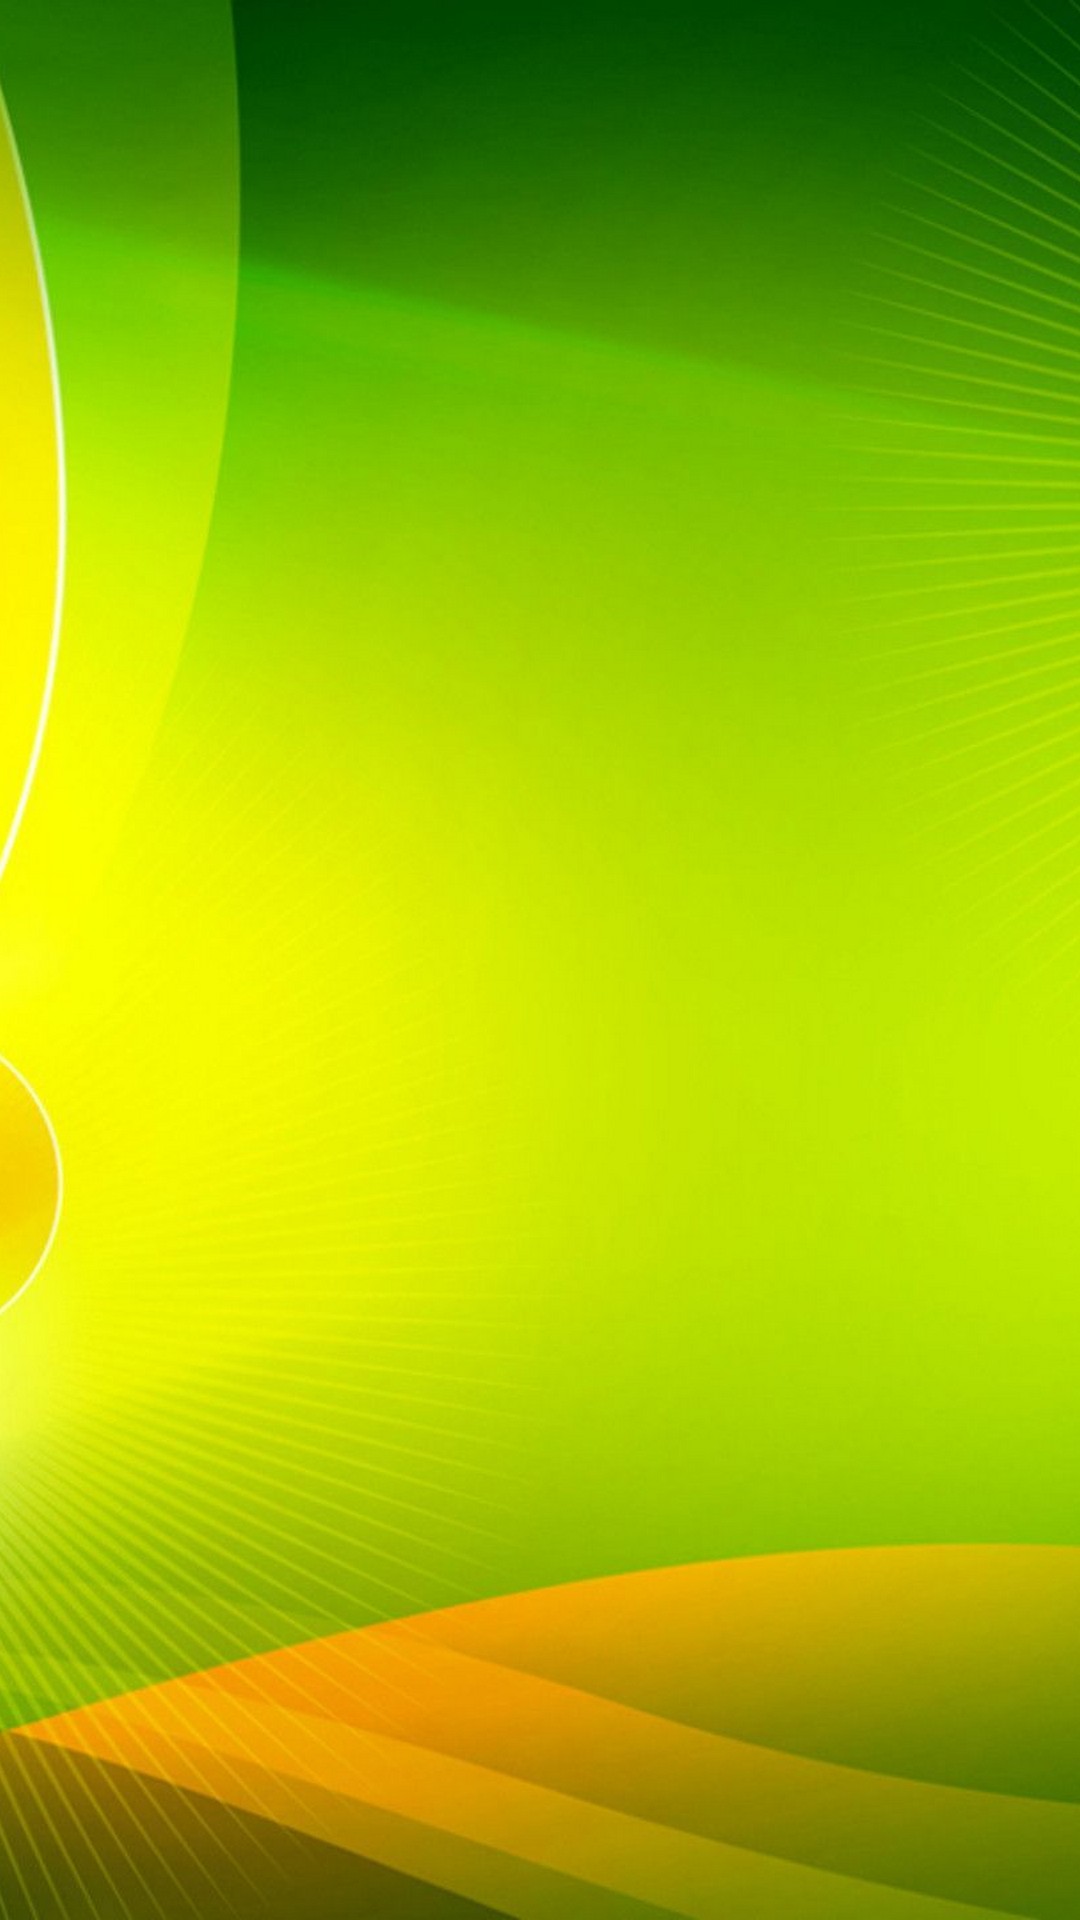 Lime Green Backgrounds For Android with image resolution 1080x1920 pixel. You can make this wallpaper for your Android backgrounds, Tablet, Smartphones Screensavers and Mobile Phone Lock Screen